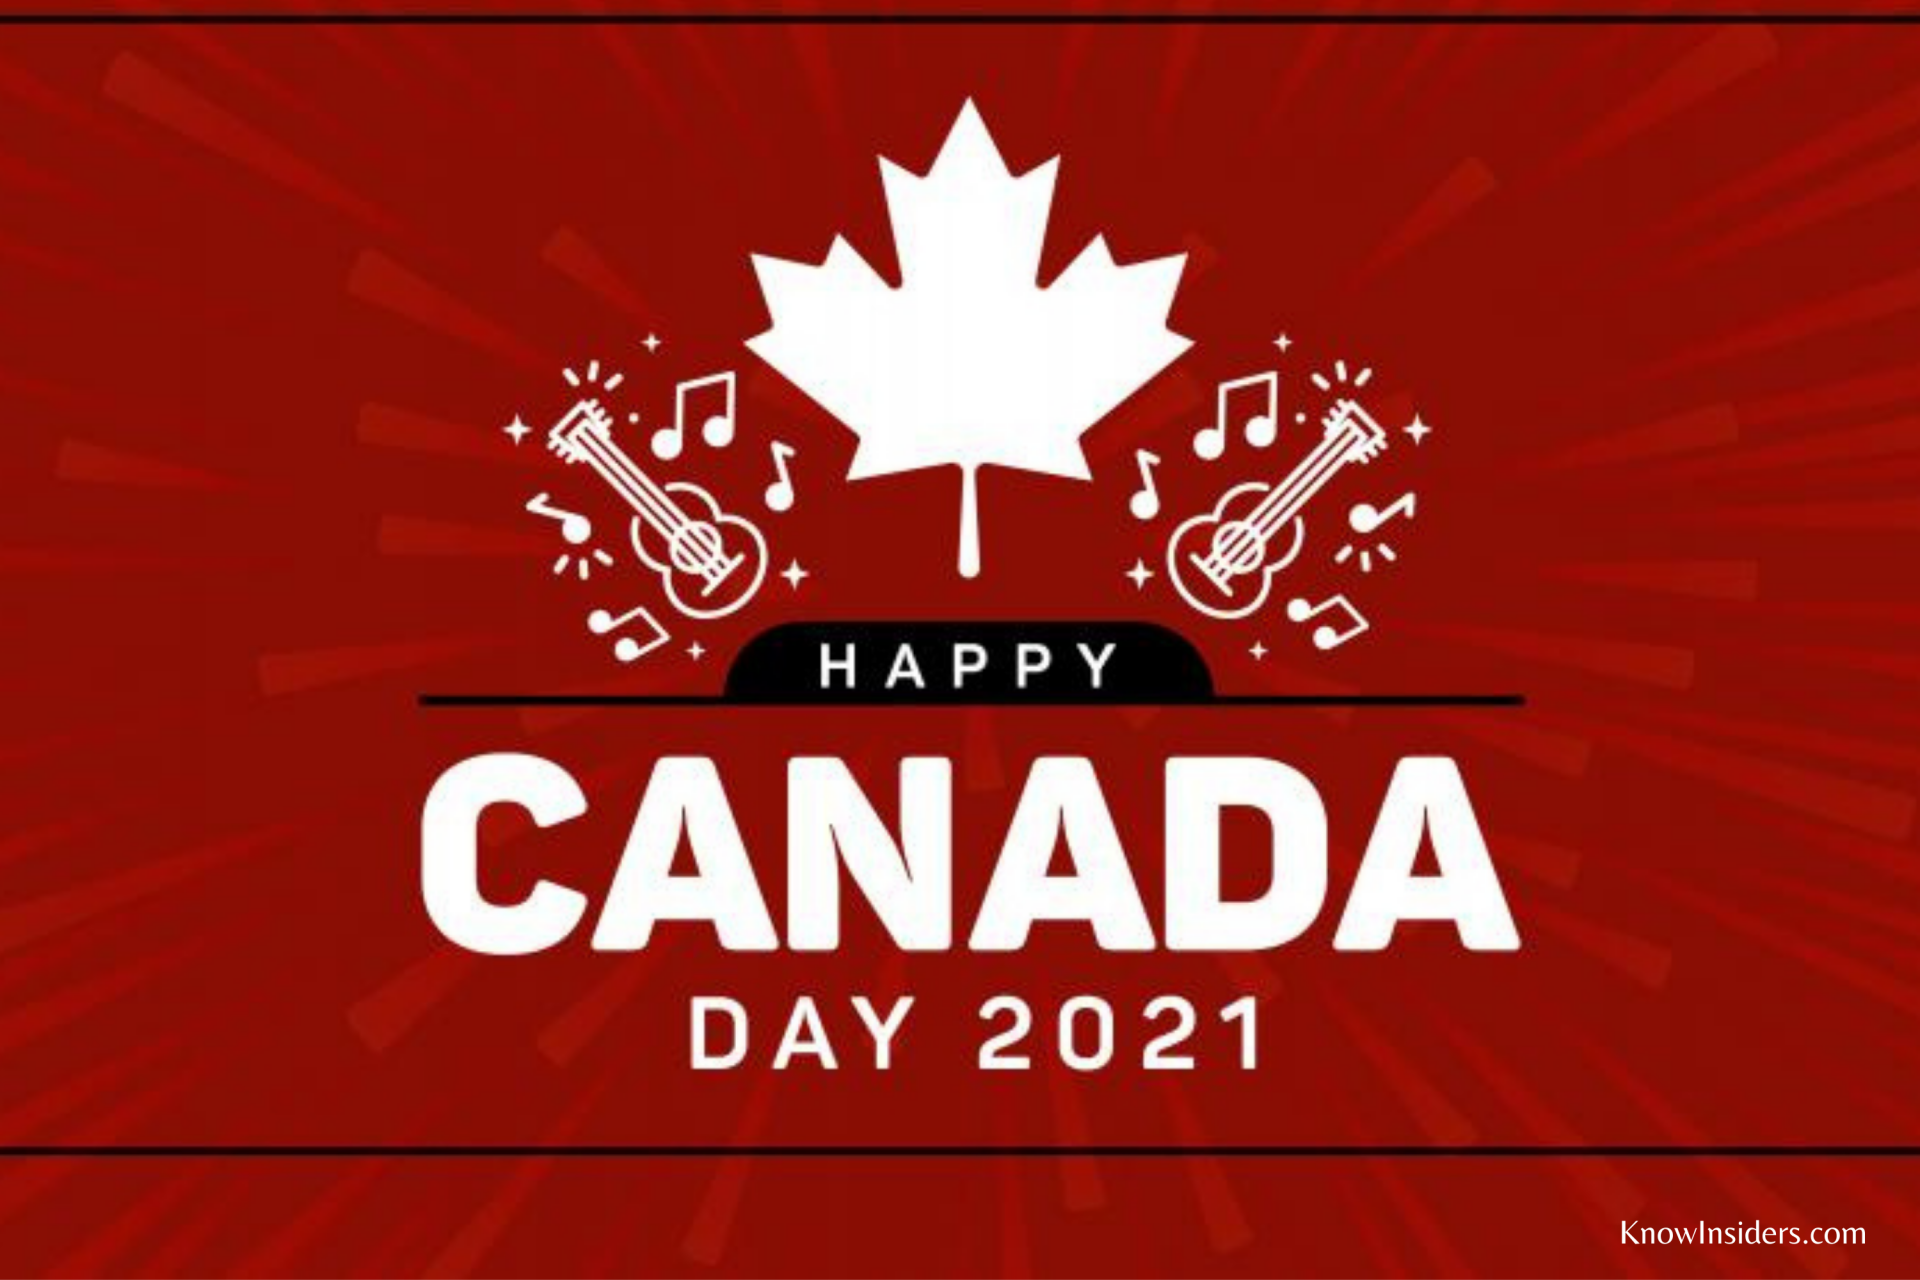 Canada Day (July 1): History, Significance, Celebrations and Facts